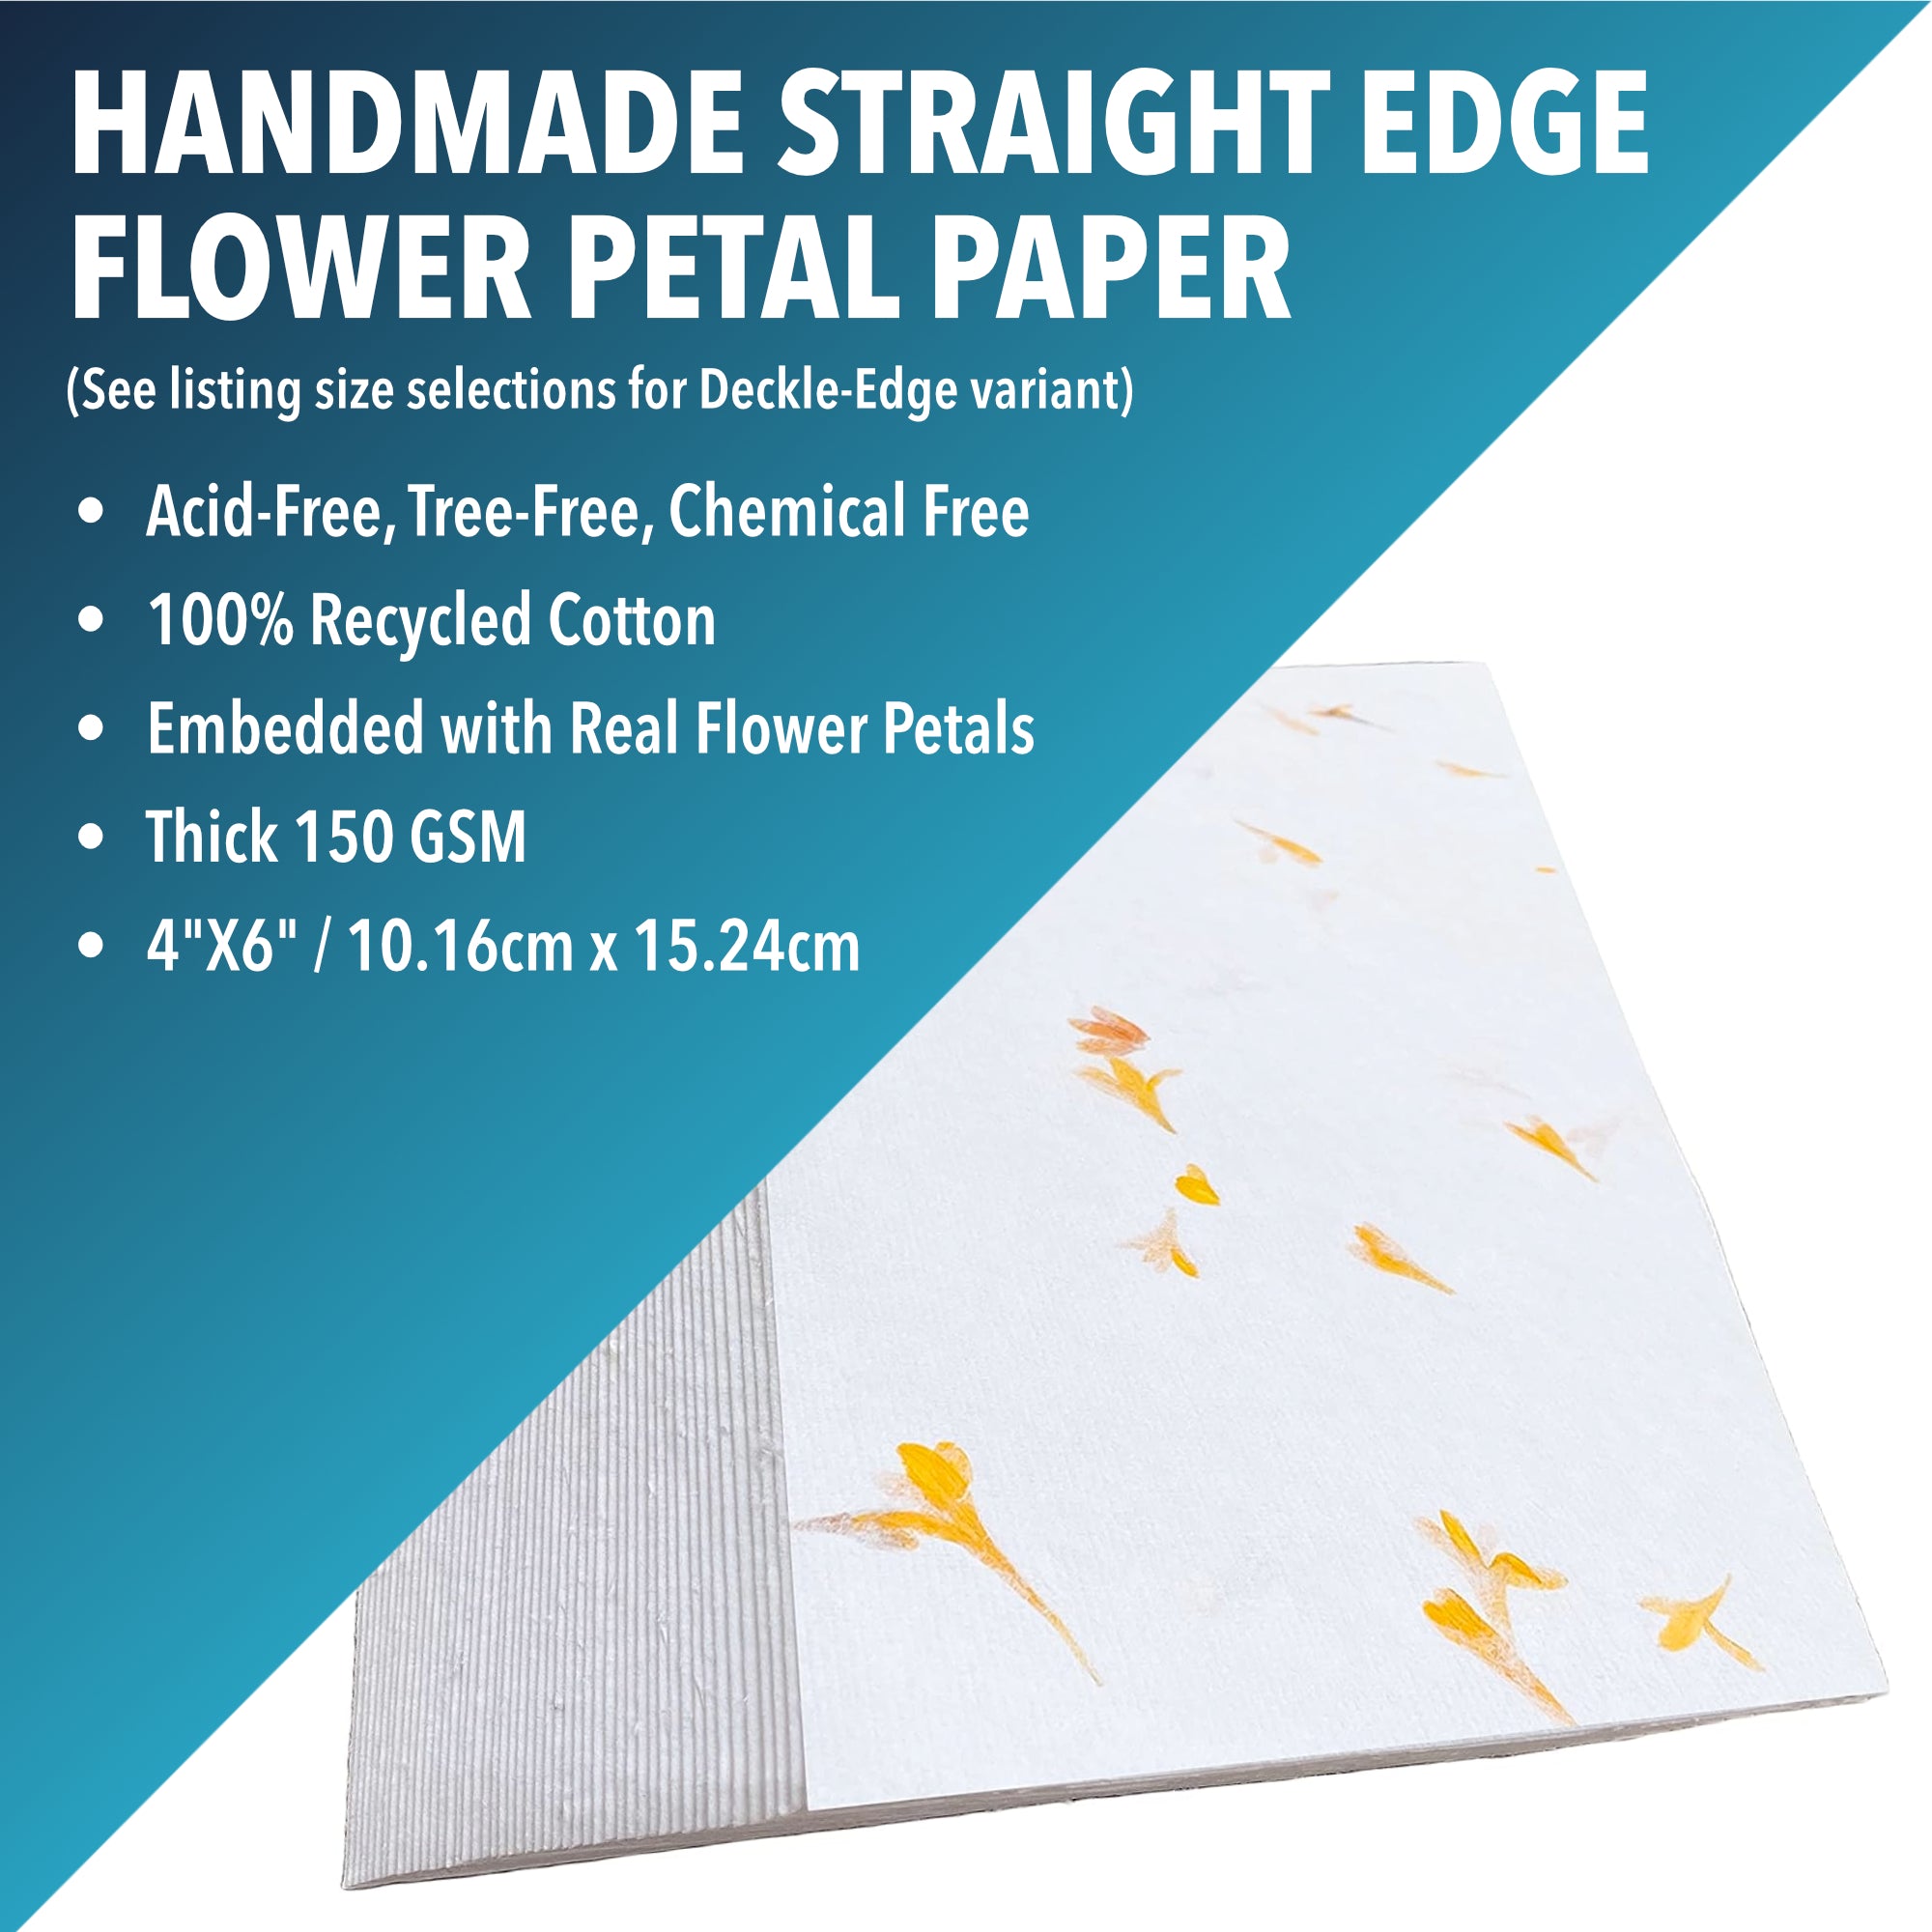 Wanderings Handmade White Deckle Edge Paper with Real Flower Petals - A4 Size Package of 50 - Mixed Media Loose Leaf Paper for Watercolor, Writers, I